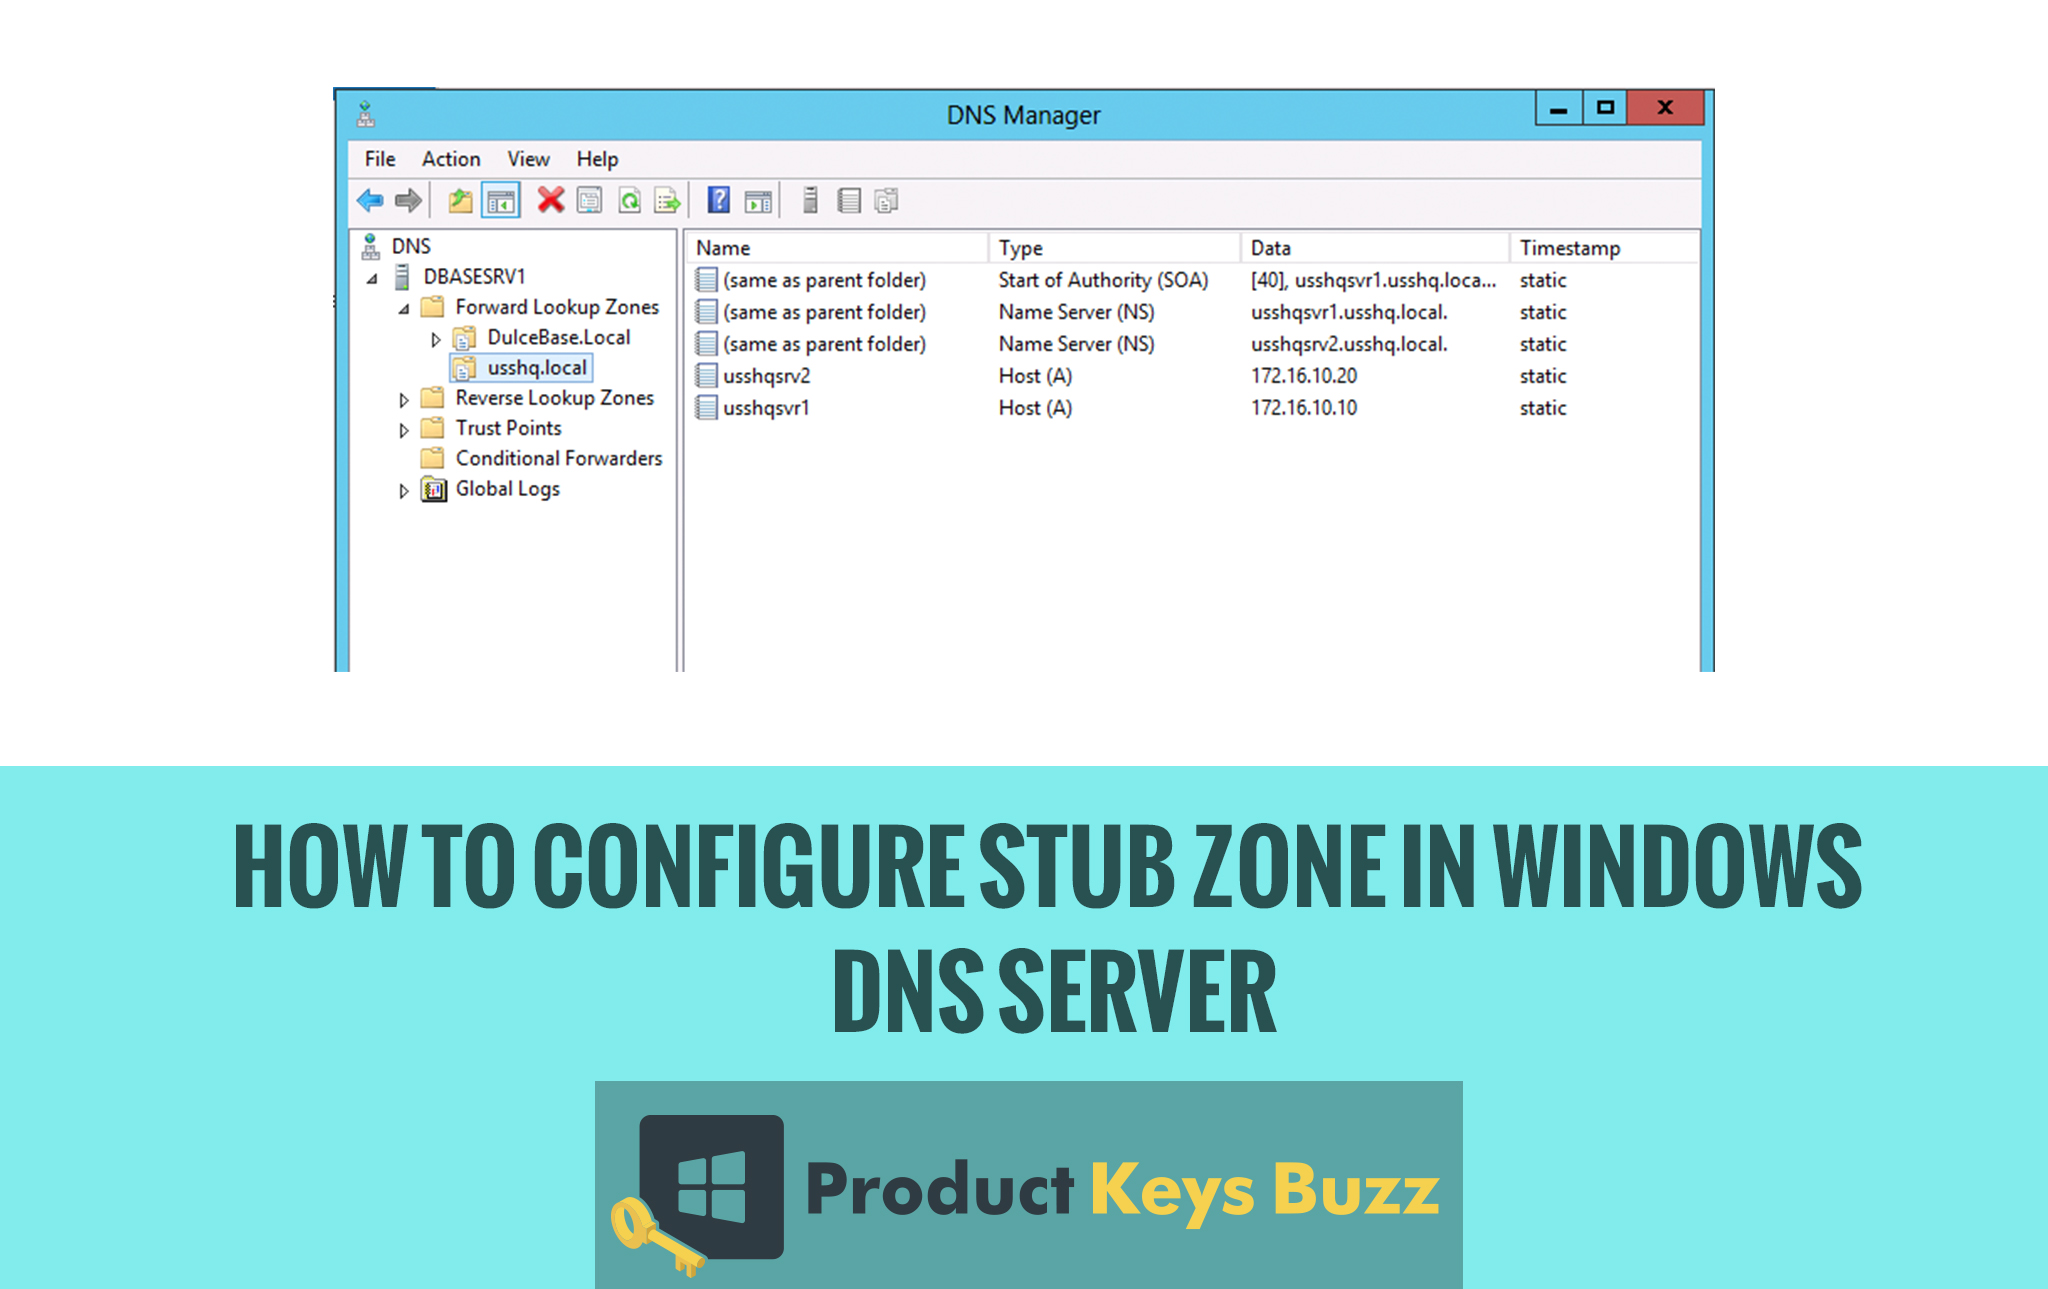 How to Configure Stub Zone in Windows DNS Server